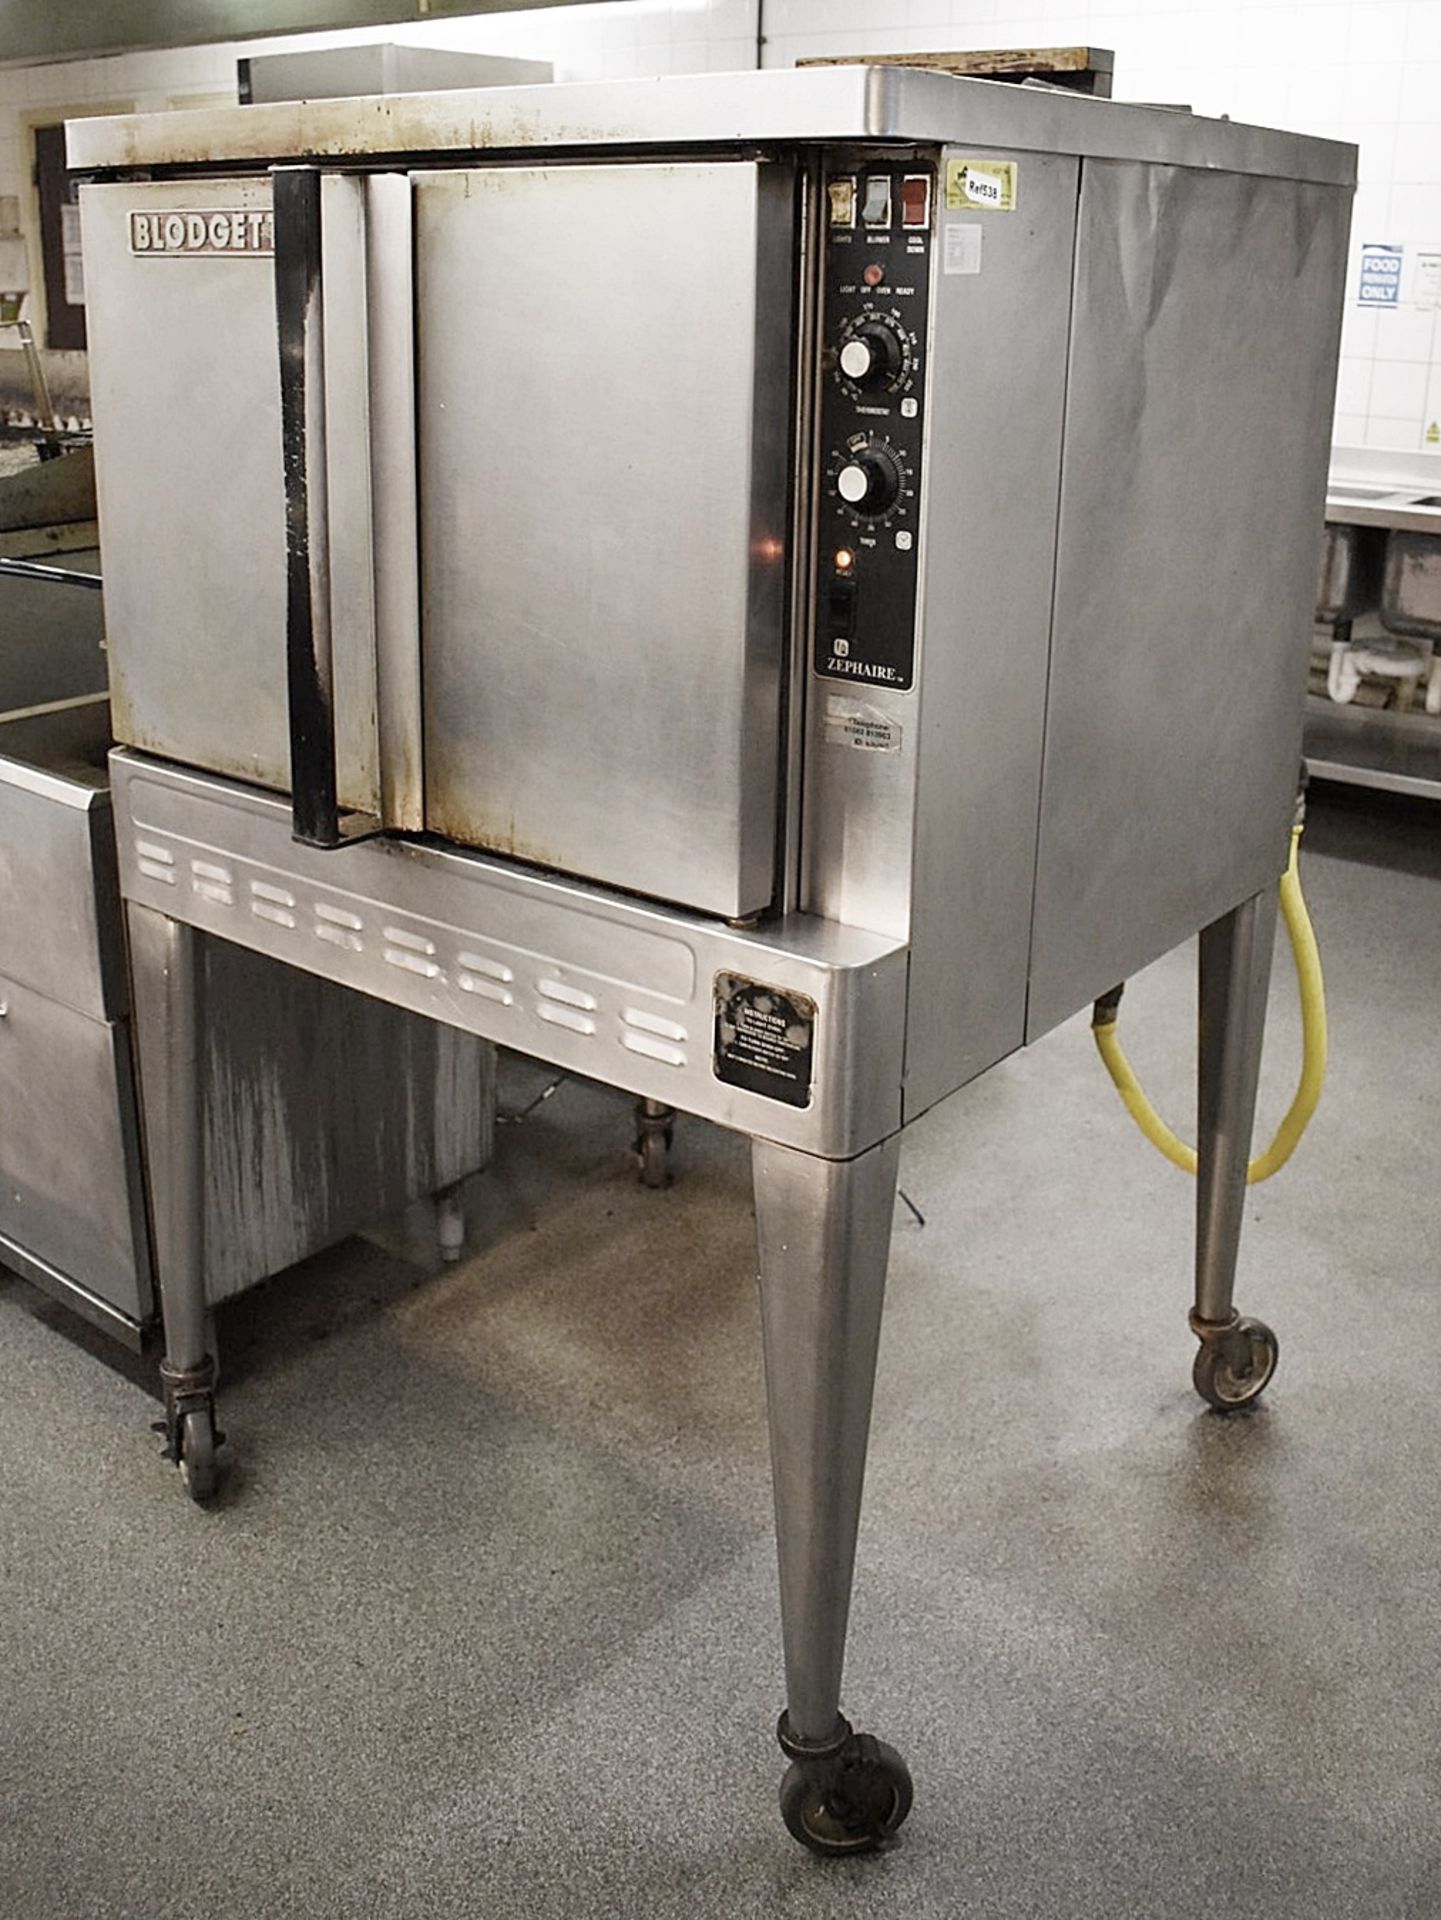 1 x Blodgett Zephaire Natural Gas Convection Oven on Castors - Stainless Steel Finish - CL461 -